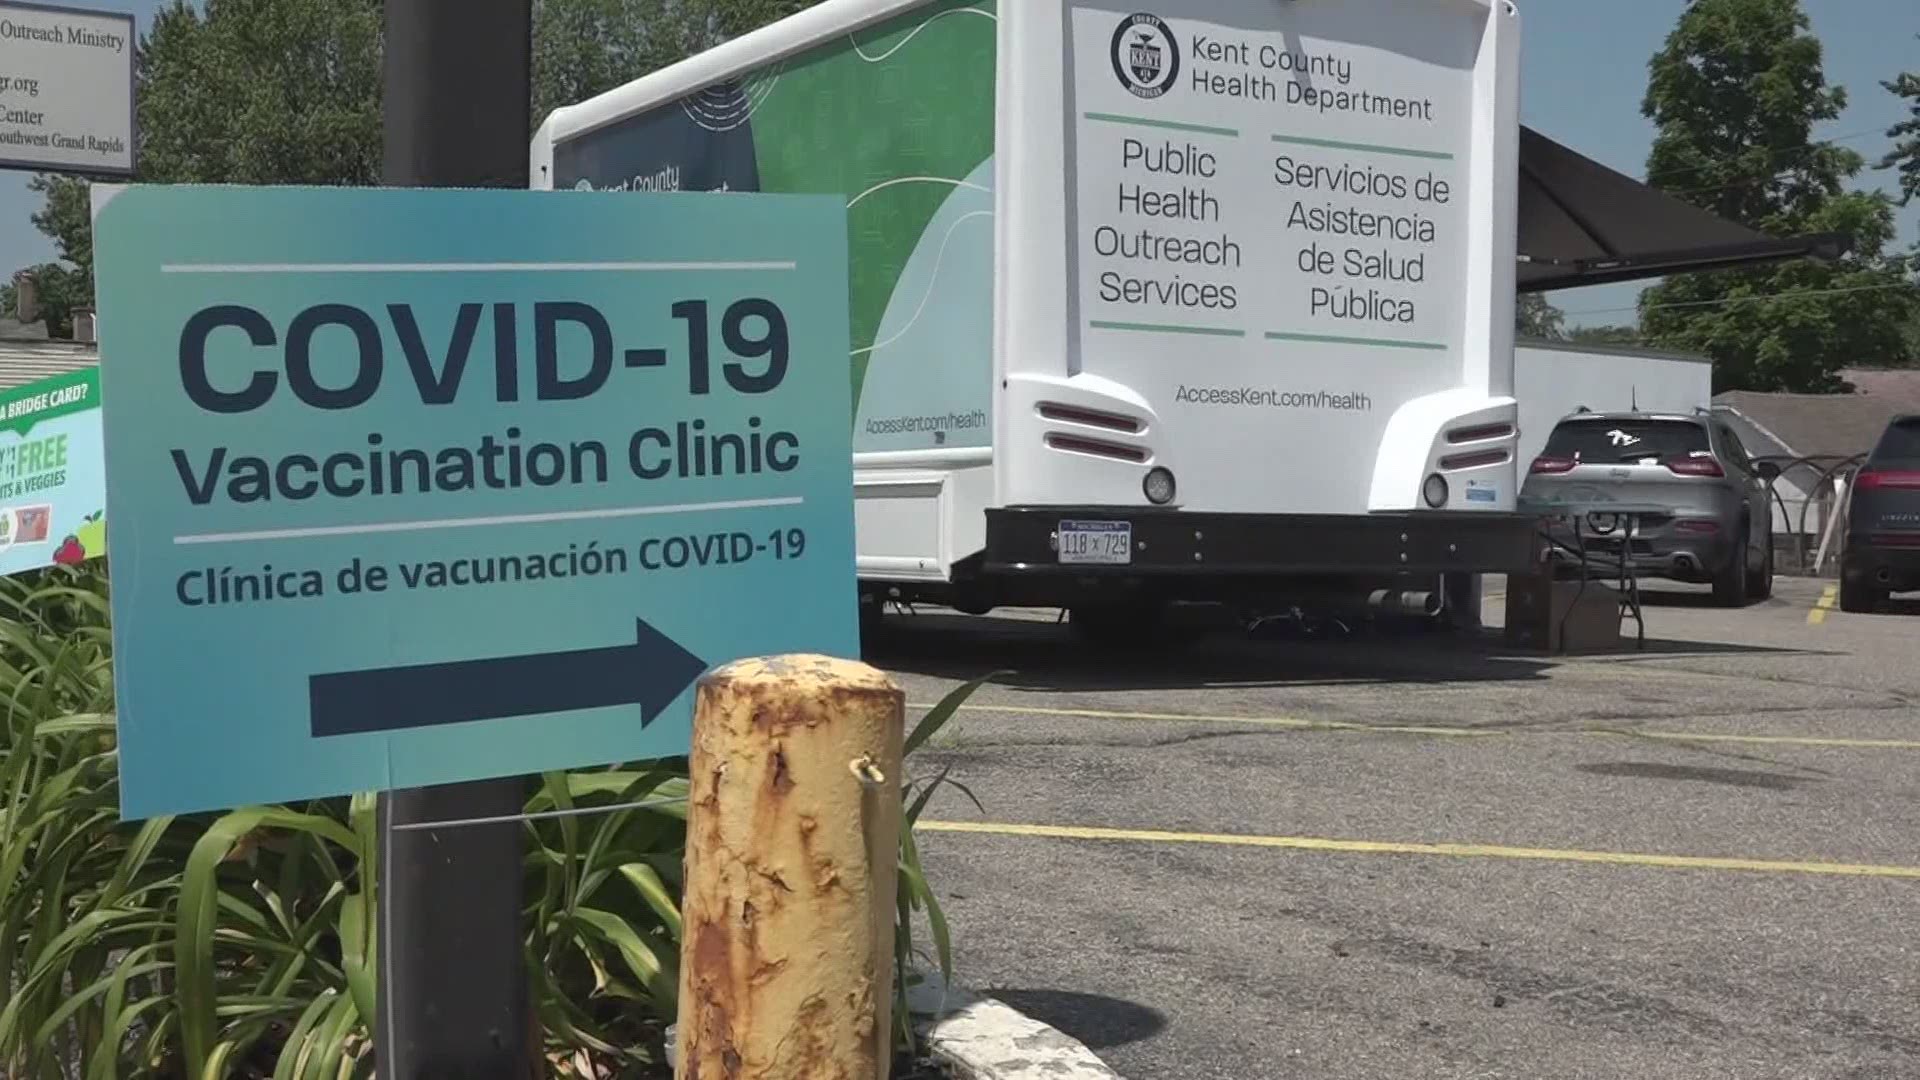 Mobile vaccination units can set up pretty much anywhere, turning a parking lot or public space into an opportunity to get more people vaccinated.